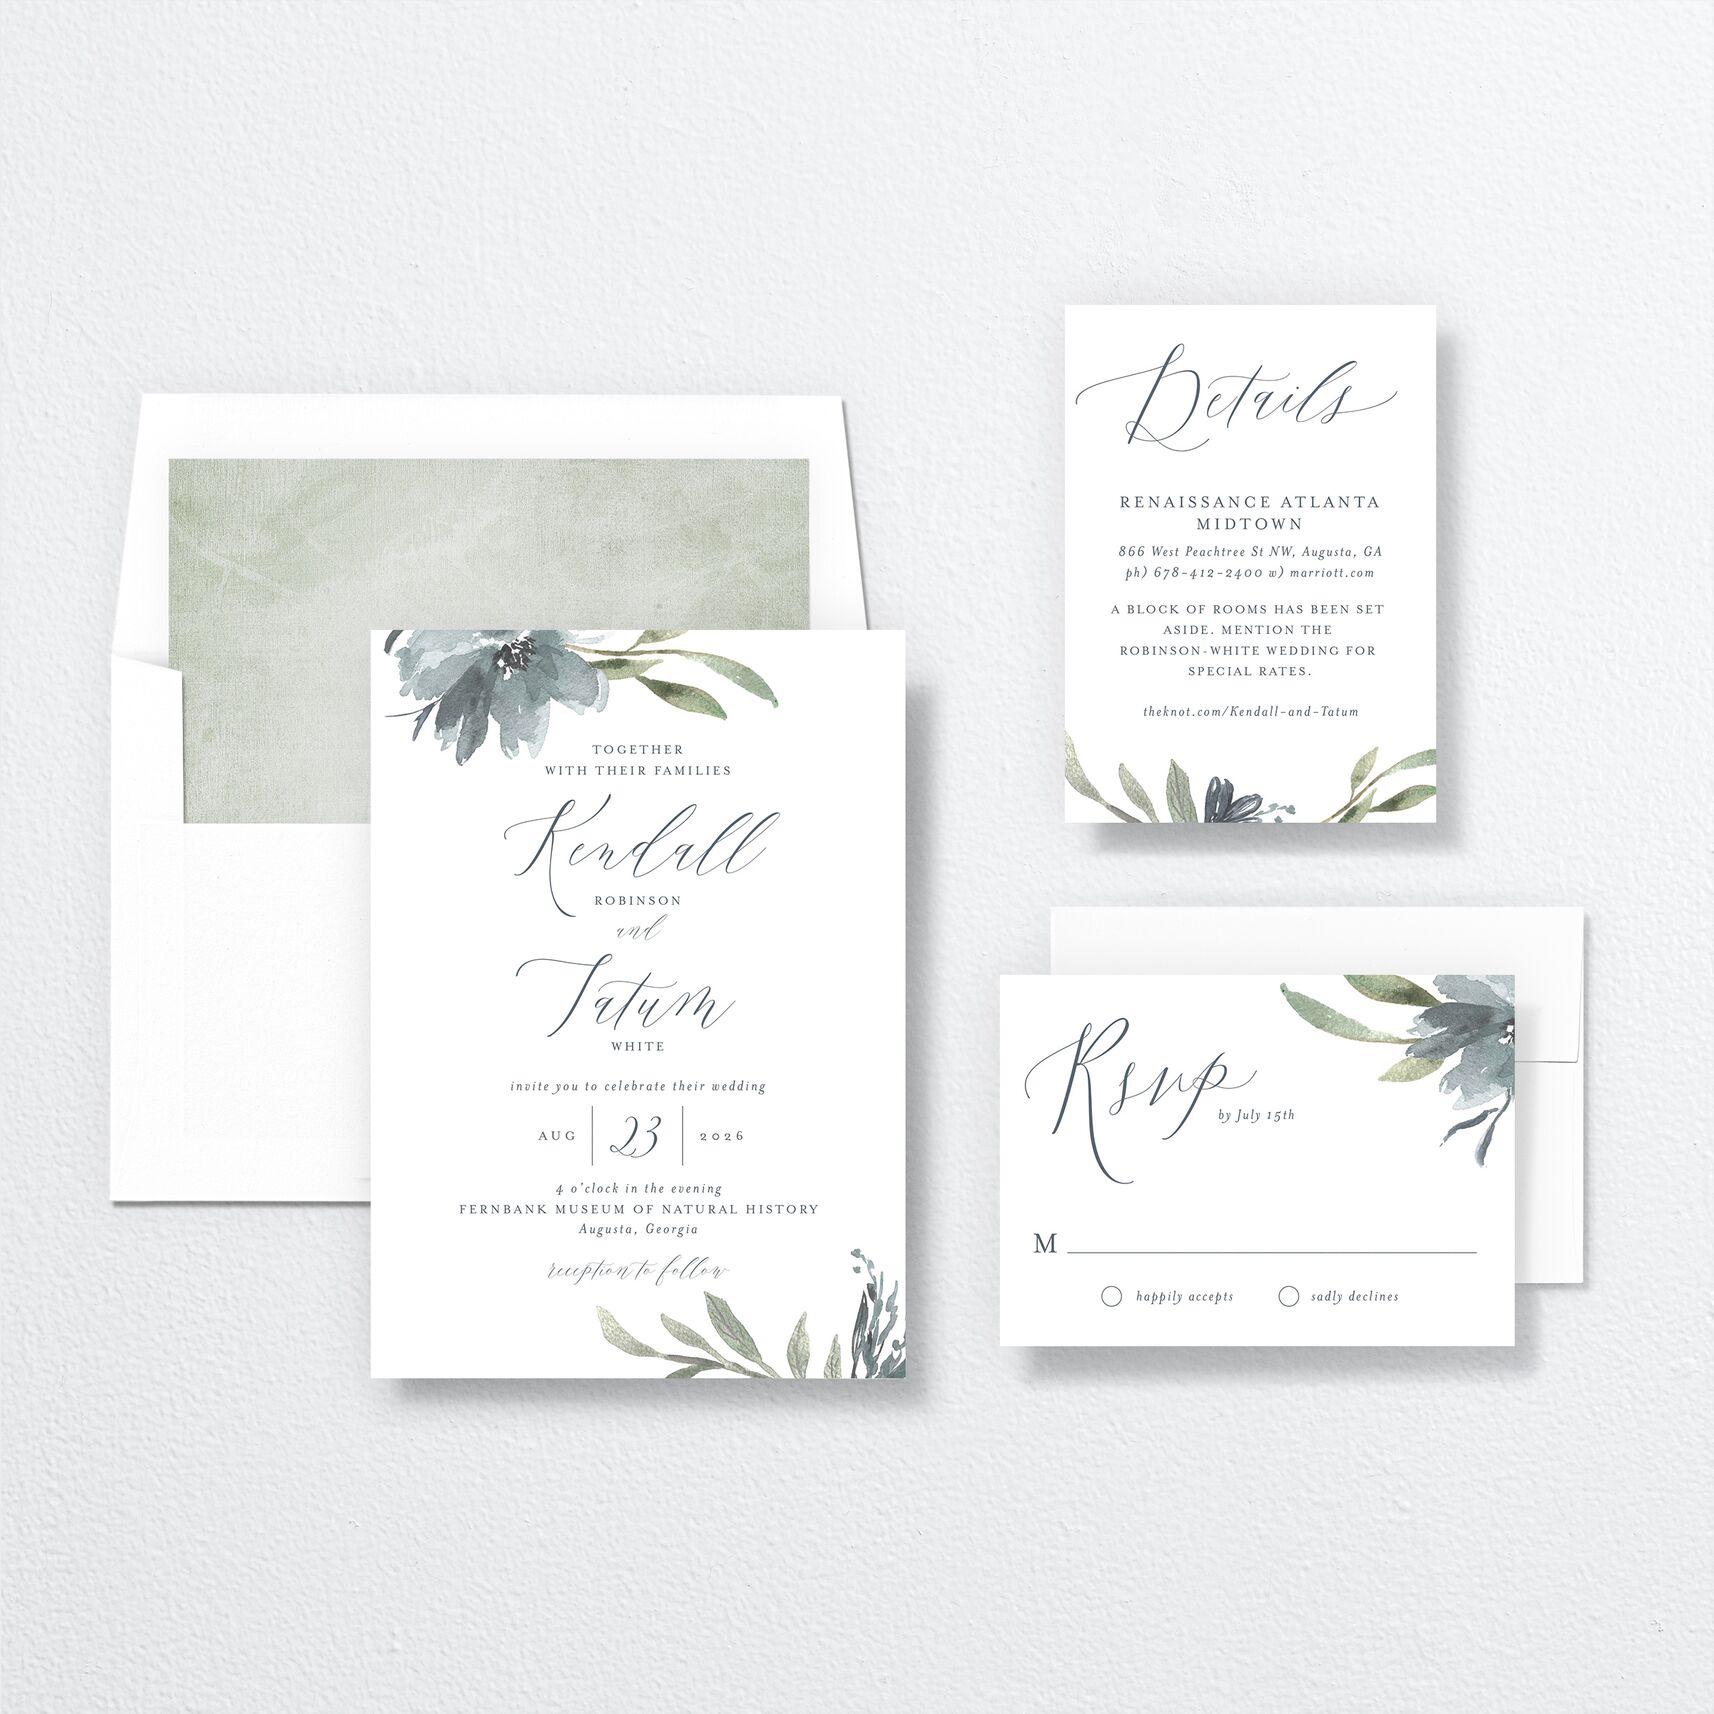 Muted Floral Wedding Invitations suite in blue